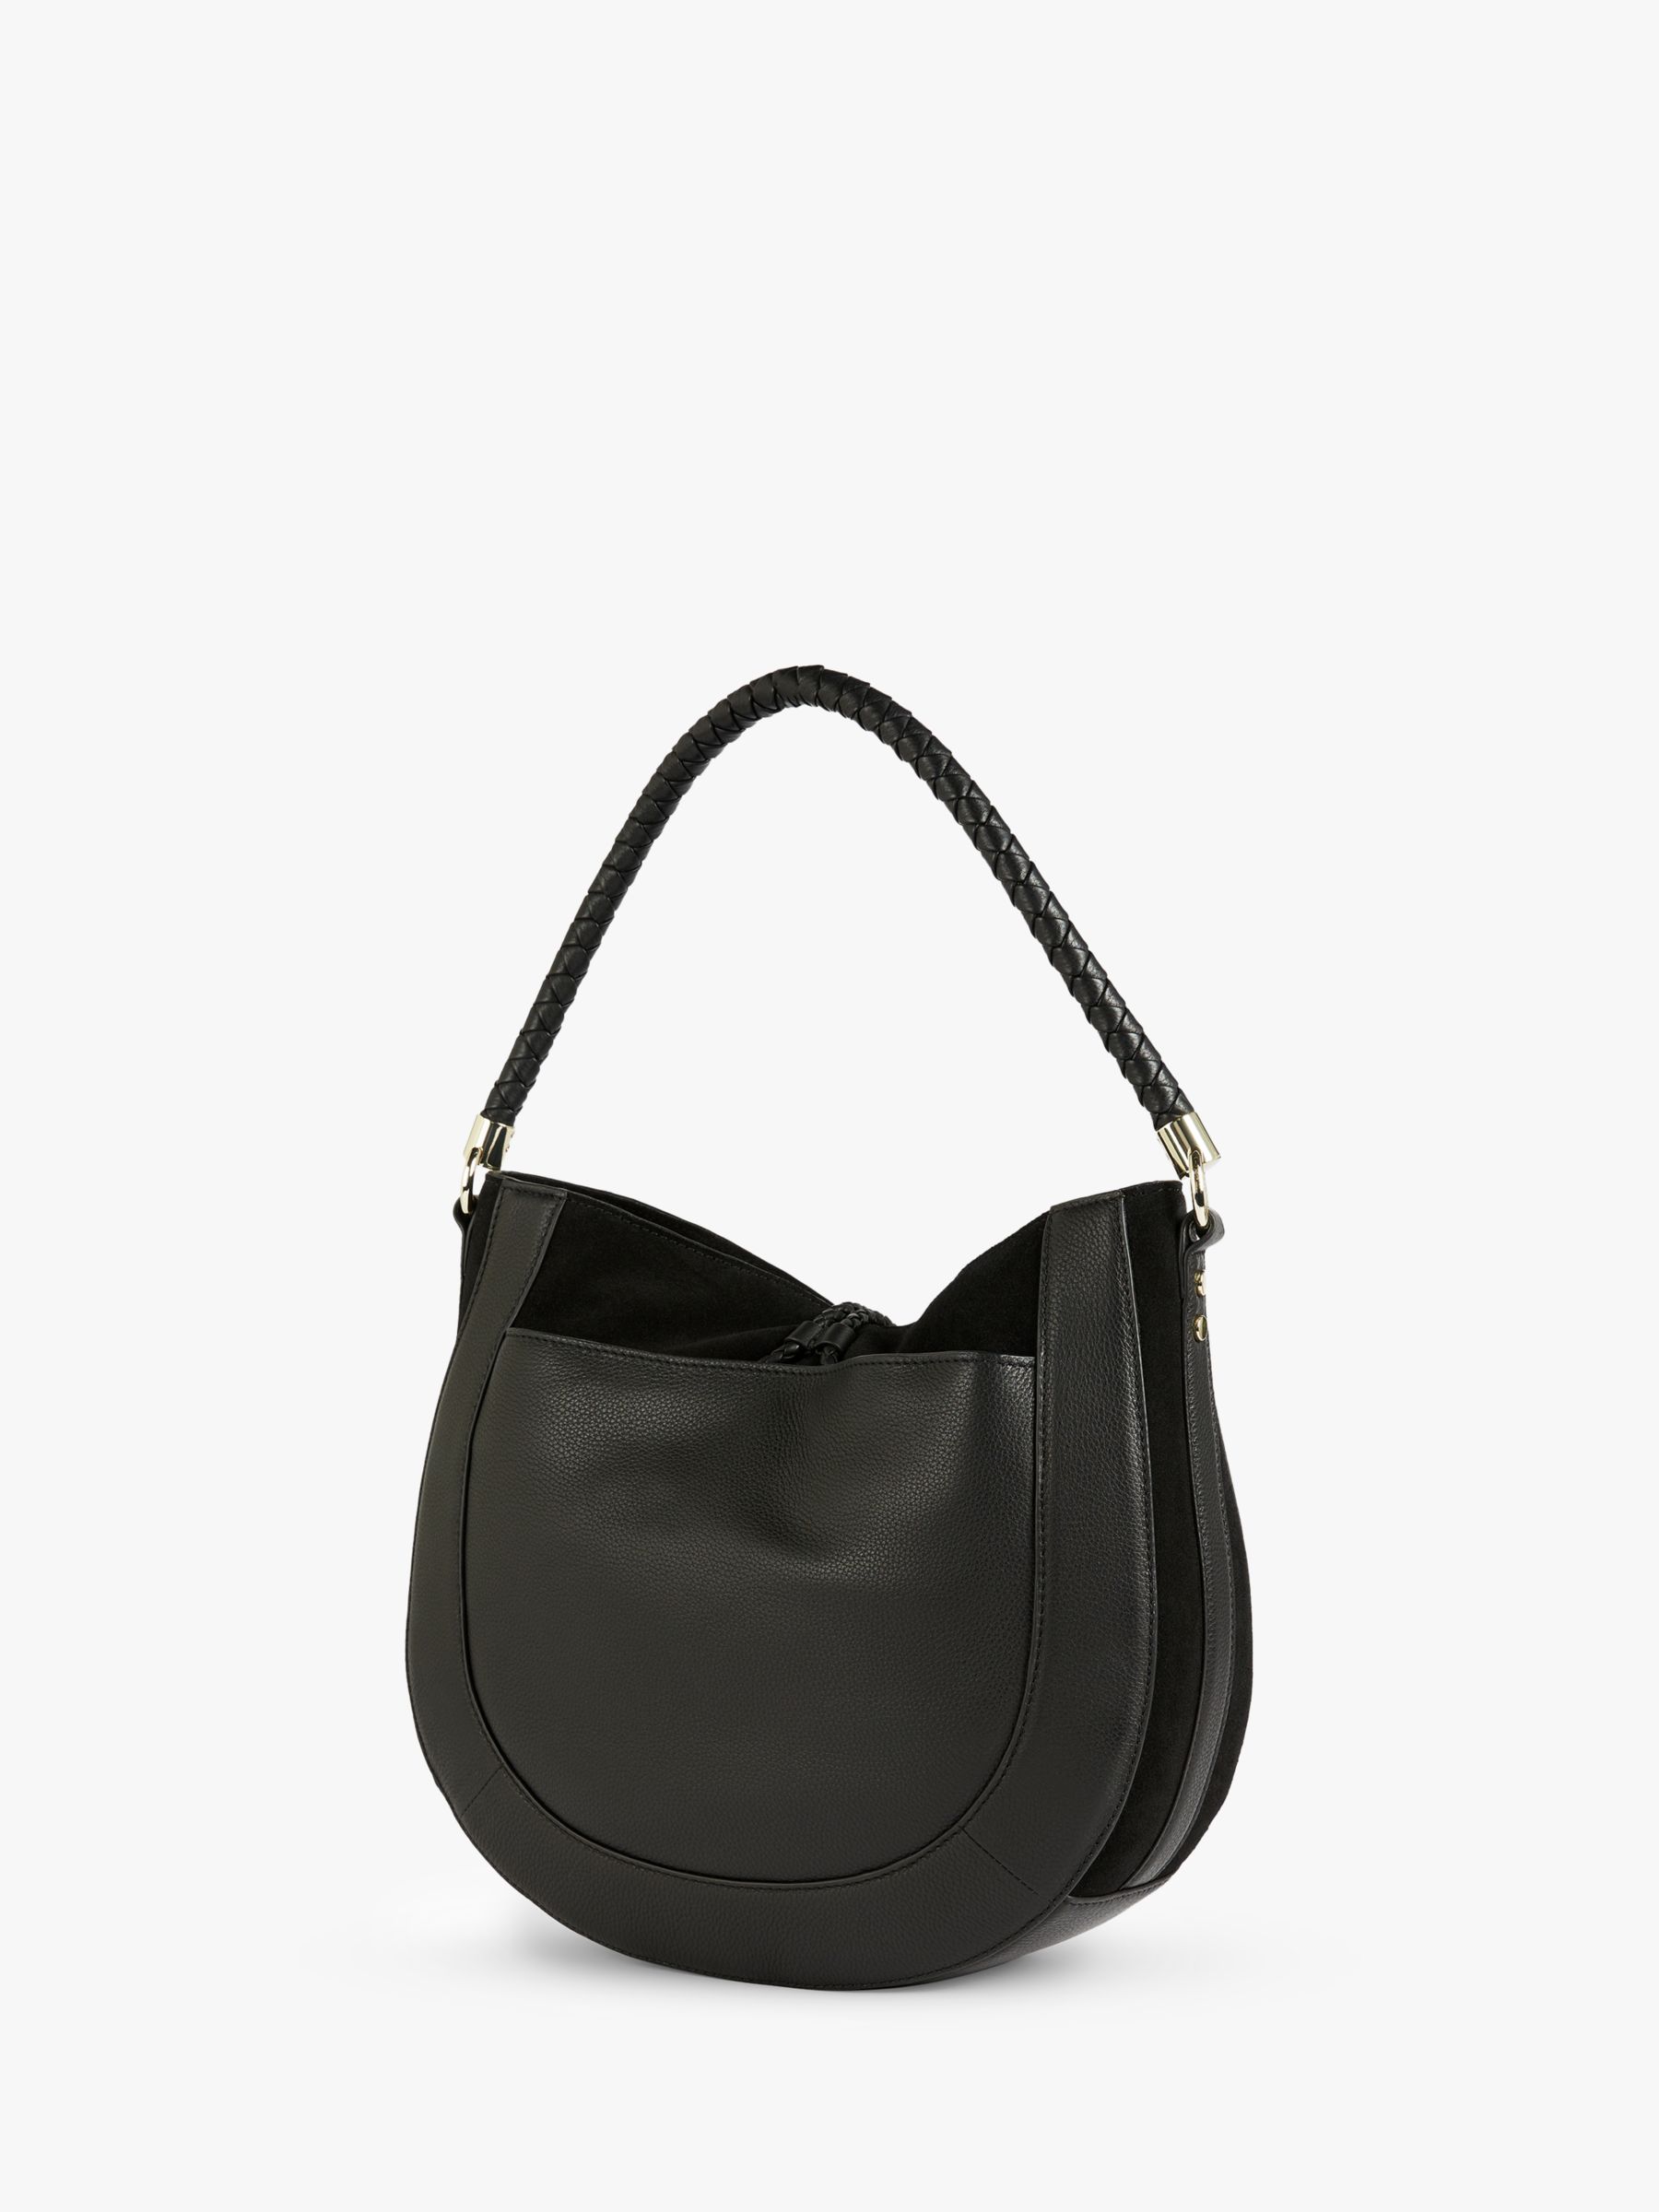 Ted Baker Parcia Braided Leather Hobo Bag, Black at John Lewis & Partners